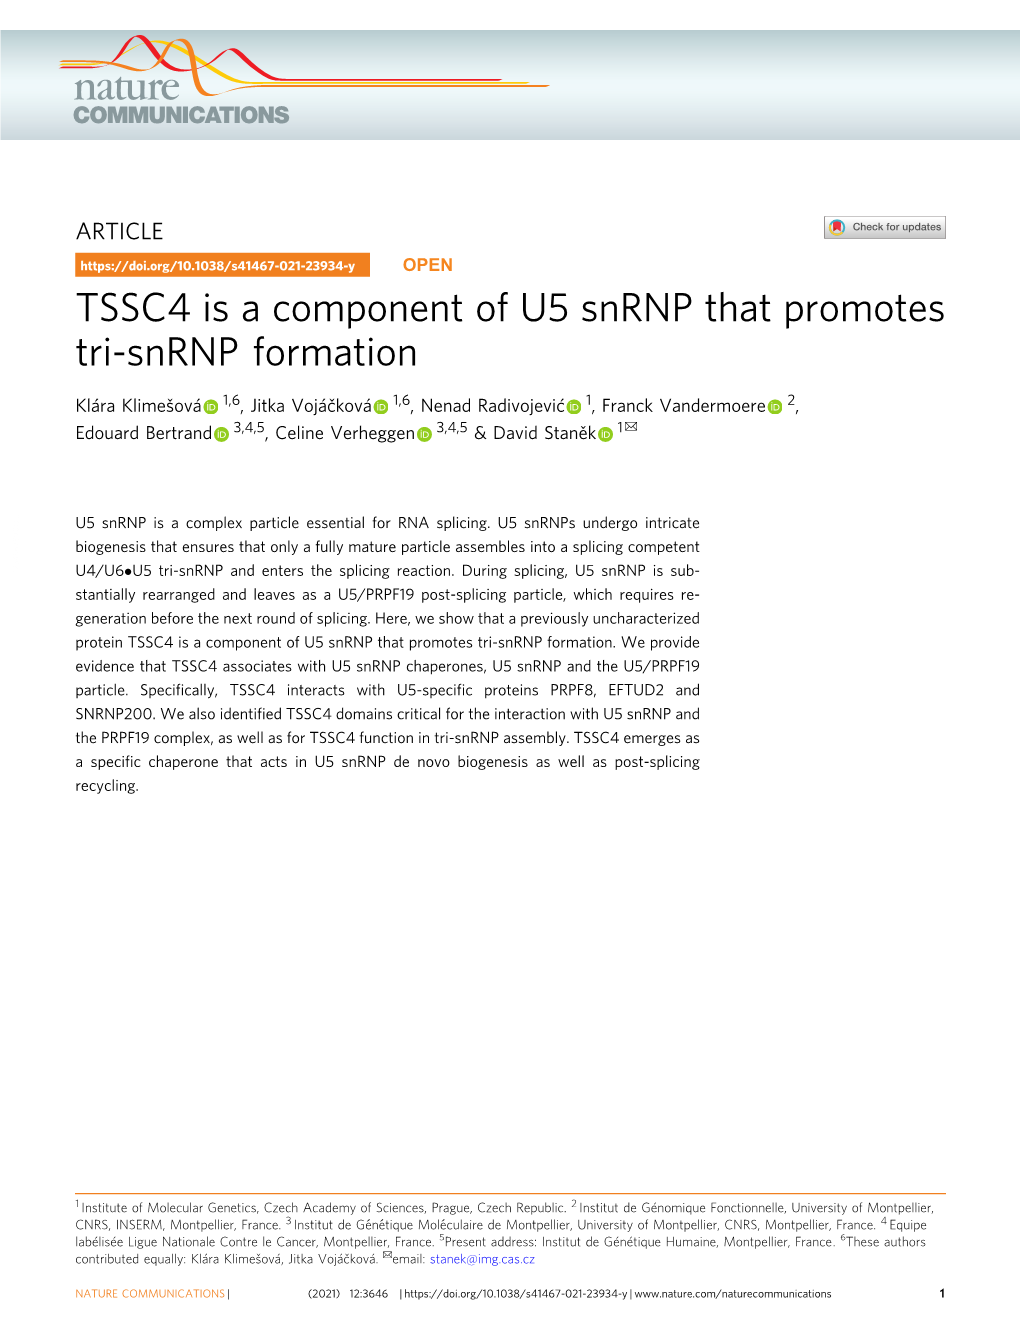 TSSC4 Is a Component of U5 Snrnp That Promotes Tri-Snrnp Formation